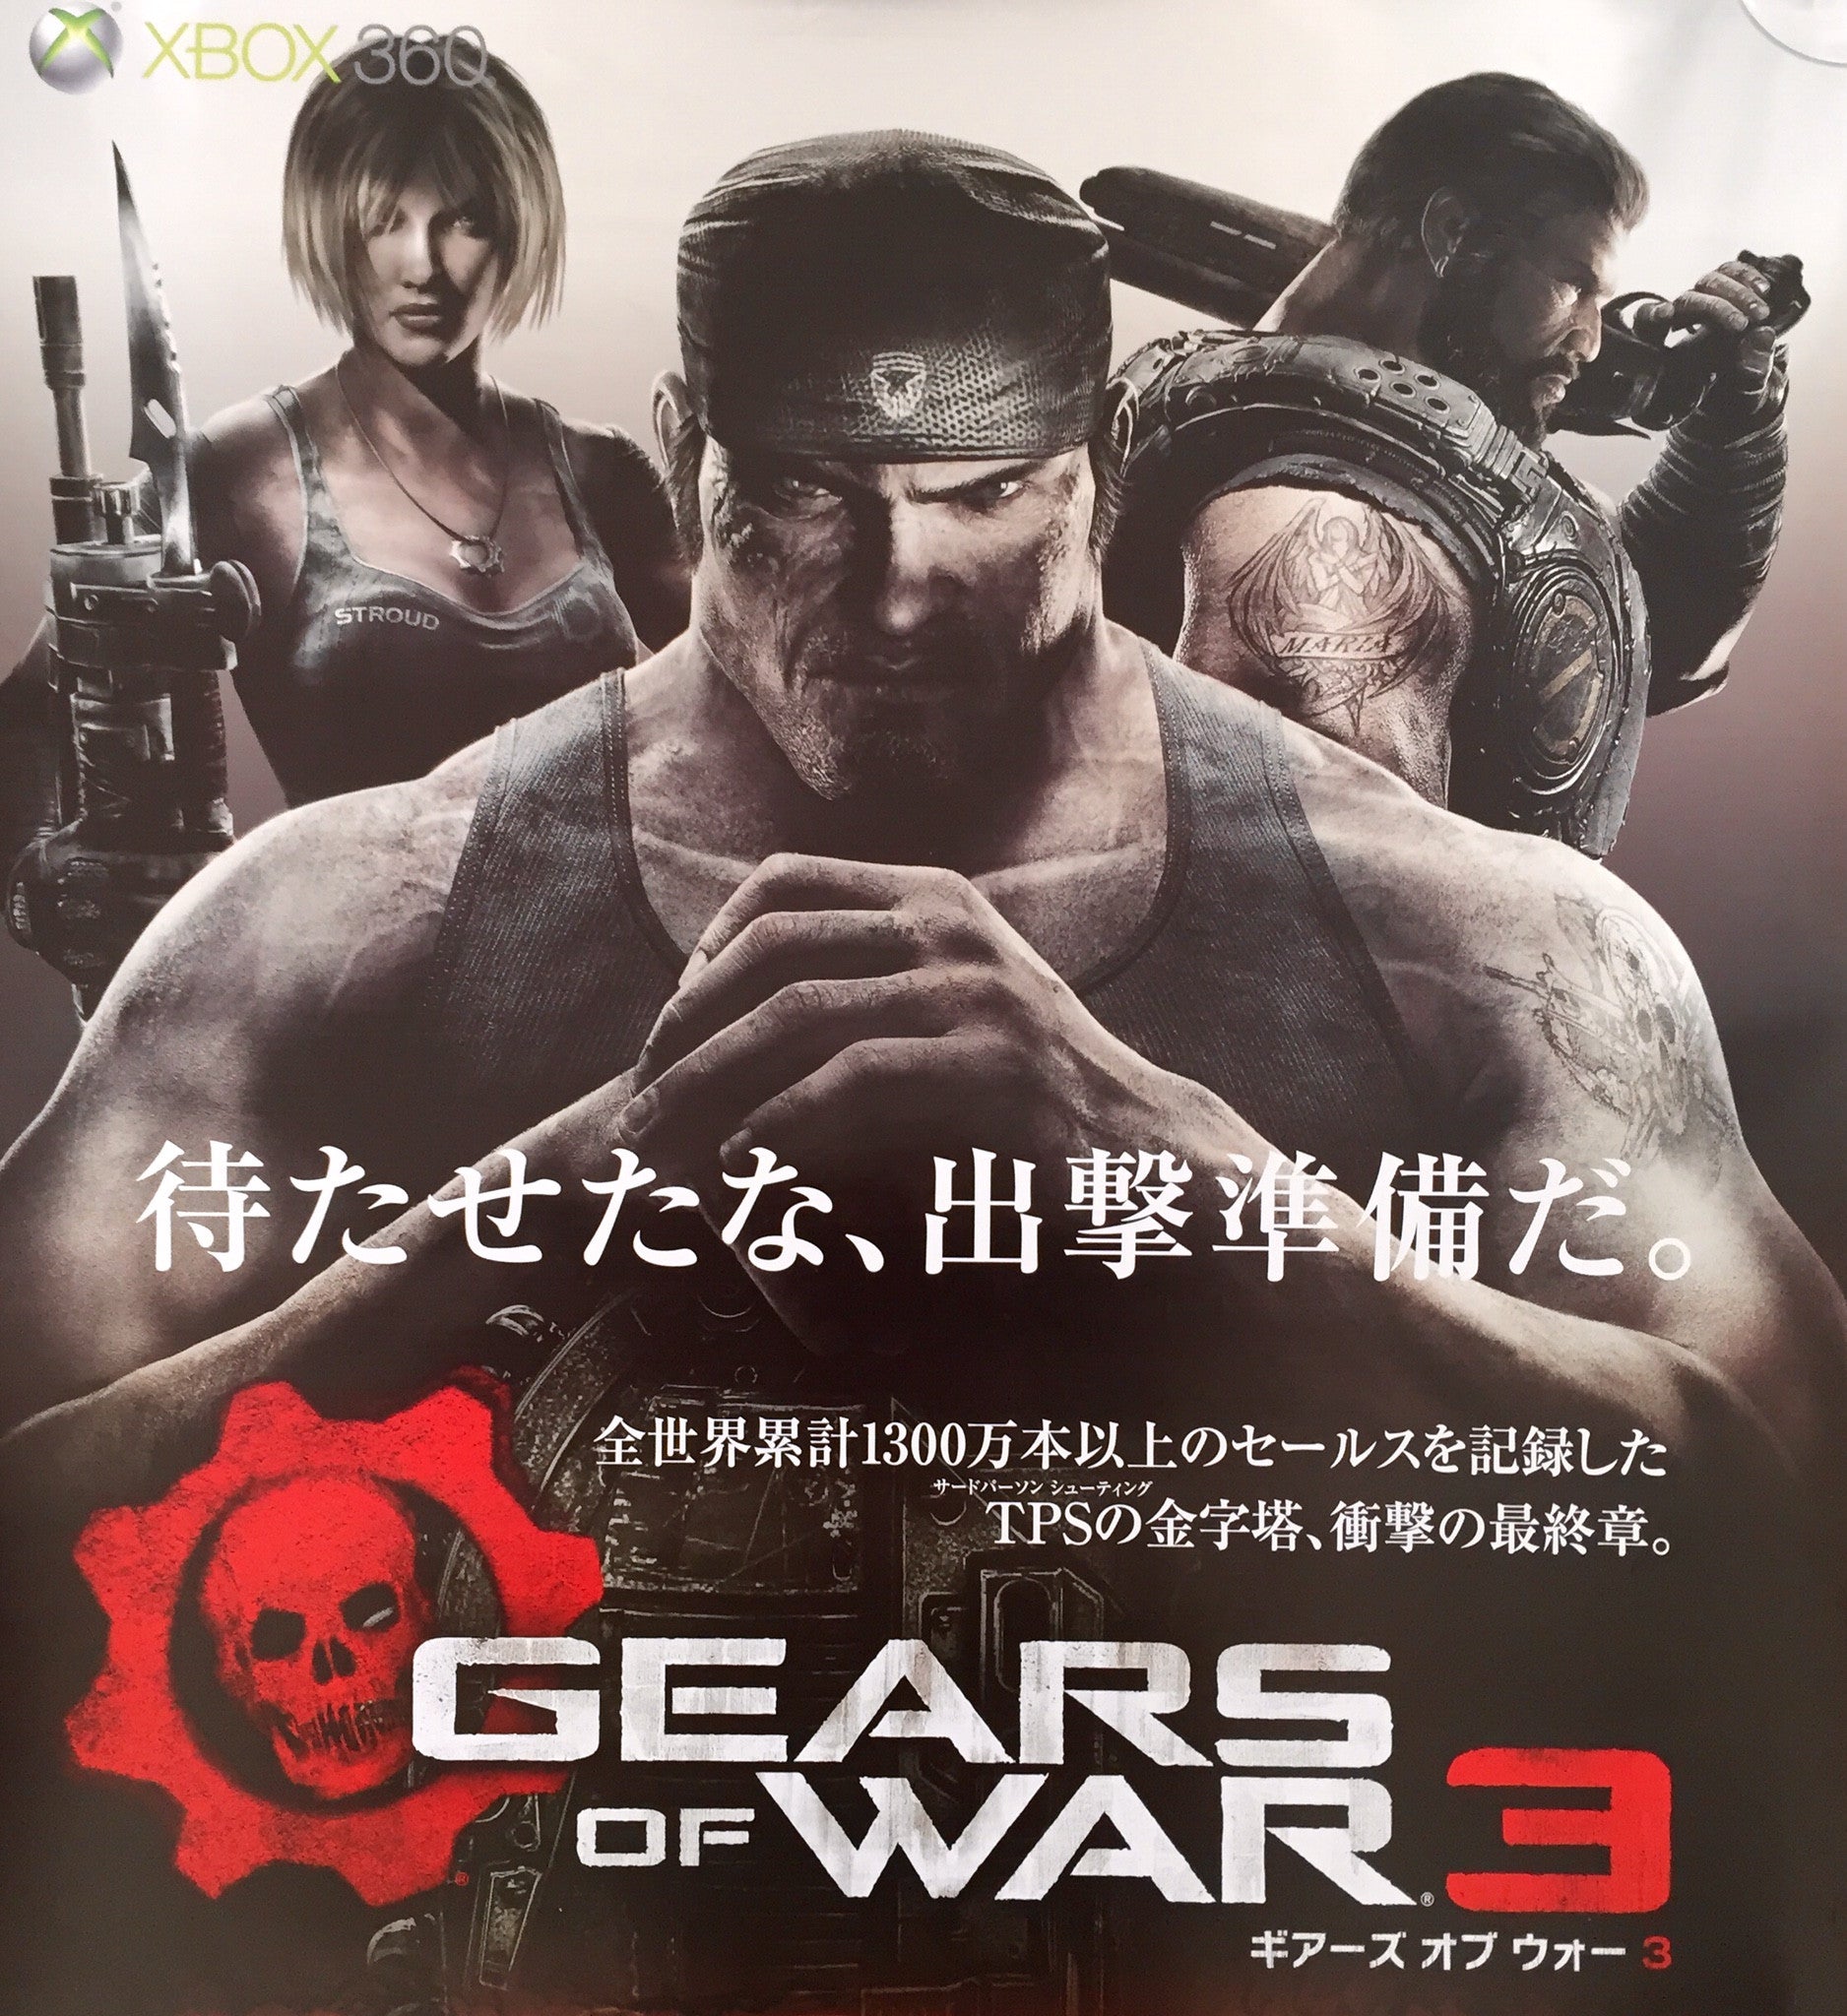 Gears of War 3 (B2) Japanese Promotional Poster